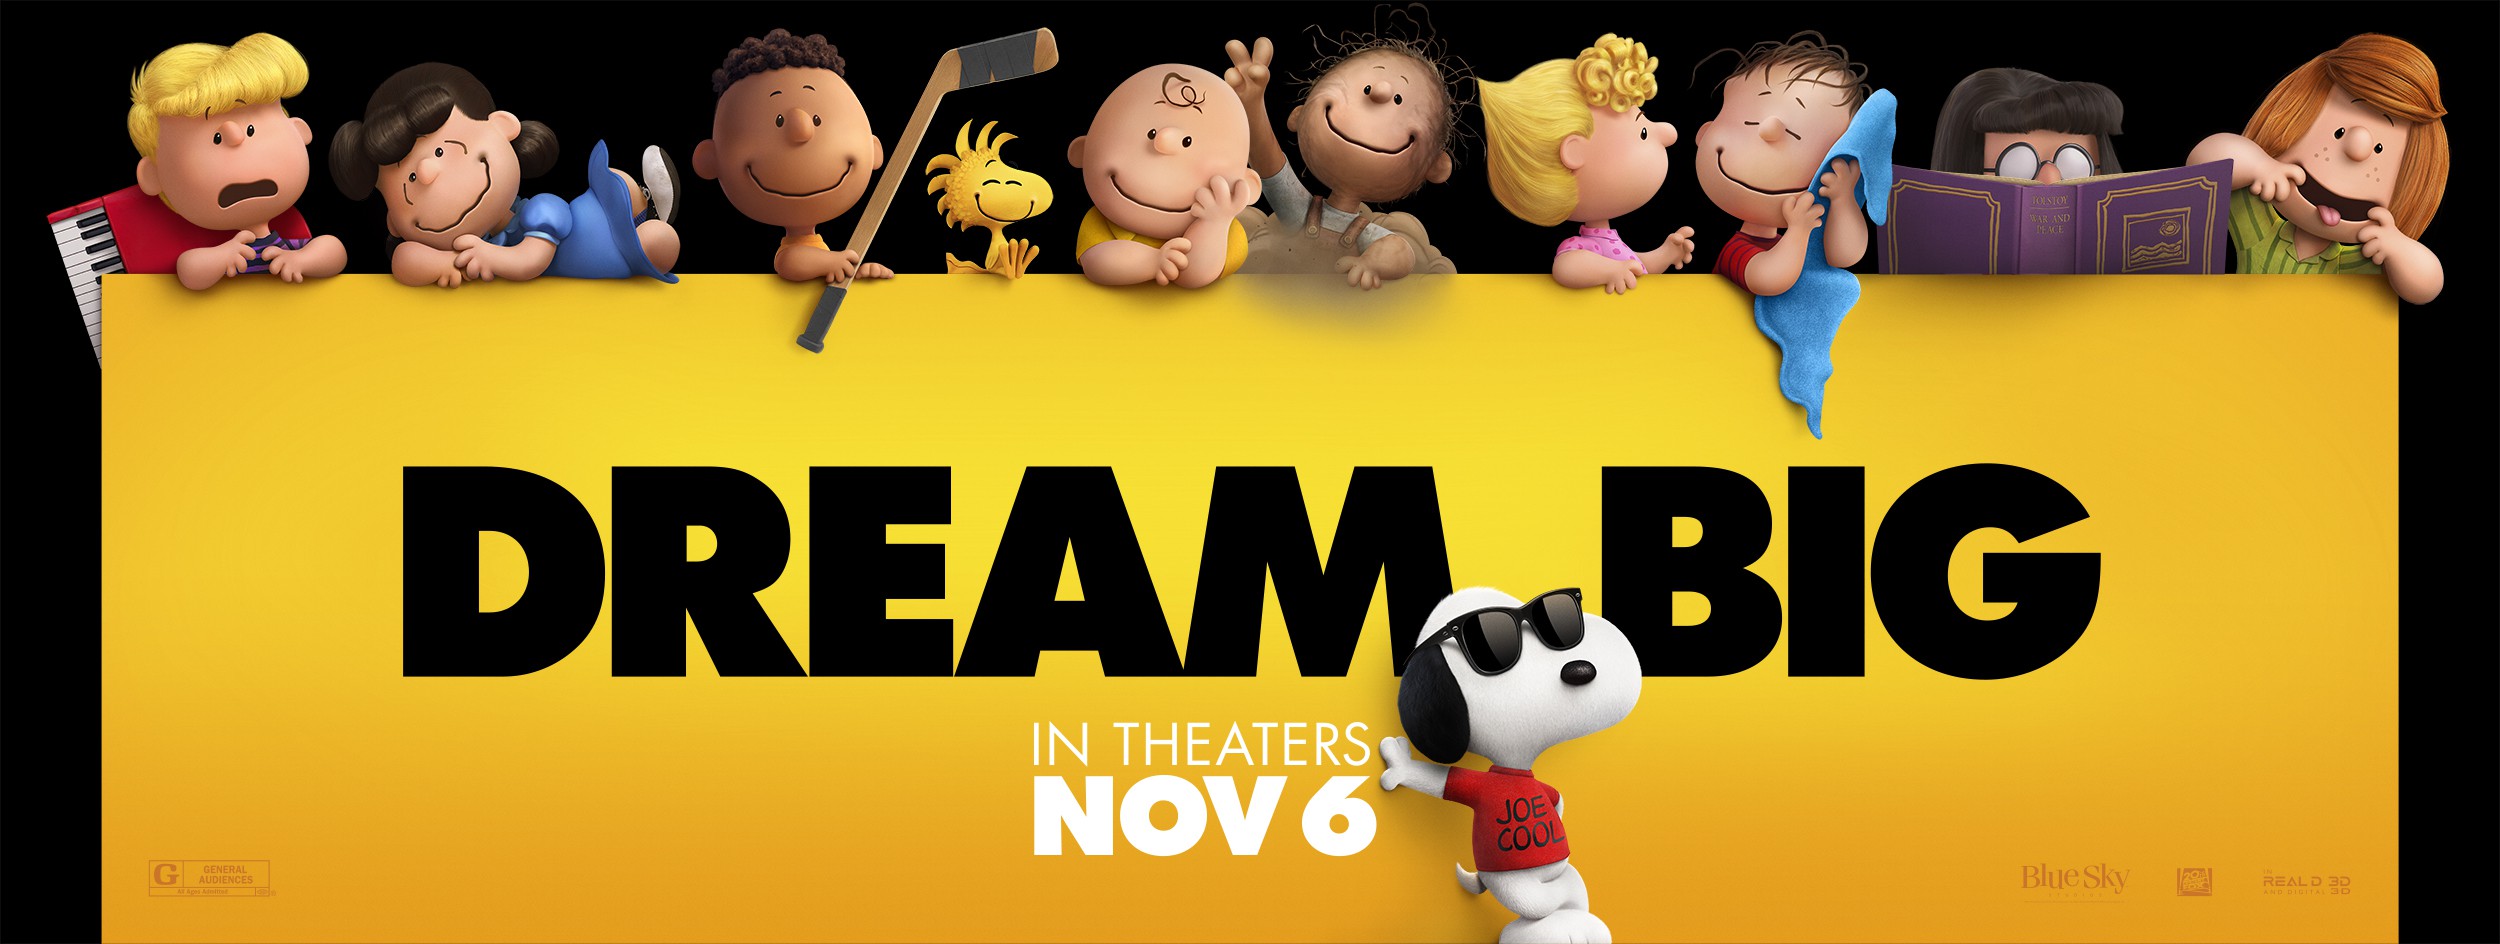 Mega Sized Movie Poster Image for Snoopy and Charlie Brown: The Peanuts Movie (#35 of 40)